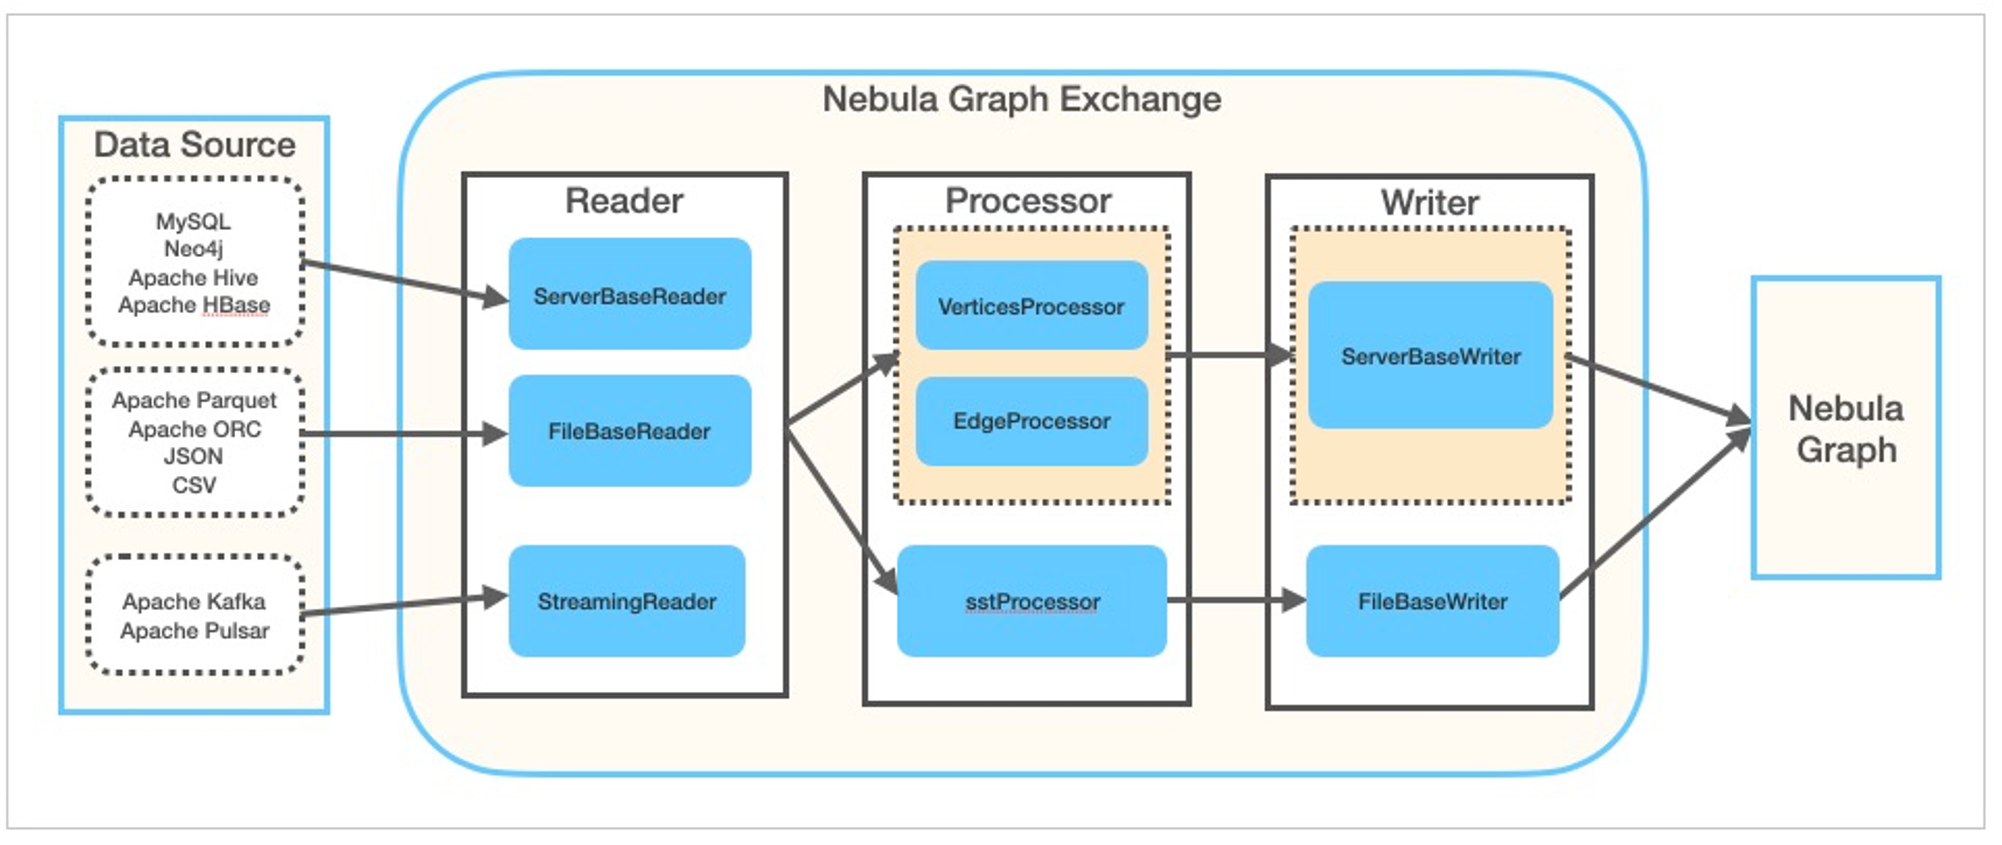 Nebula Graph® Exchange consists of Reader, Processor, and Writer that can migrate data from a variety of formats and sources to Nebula Graph